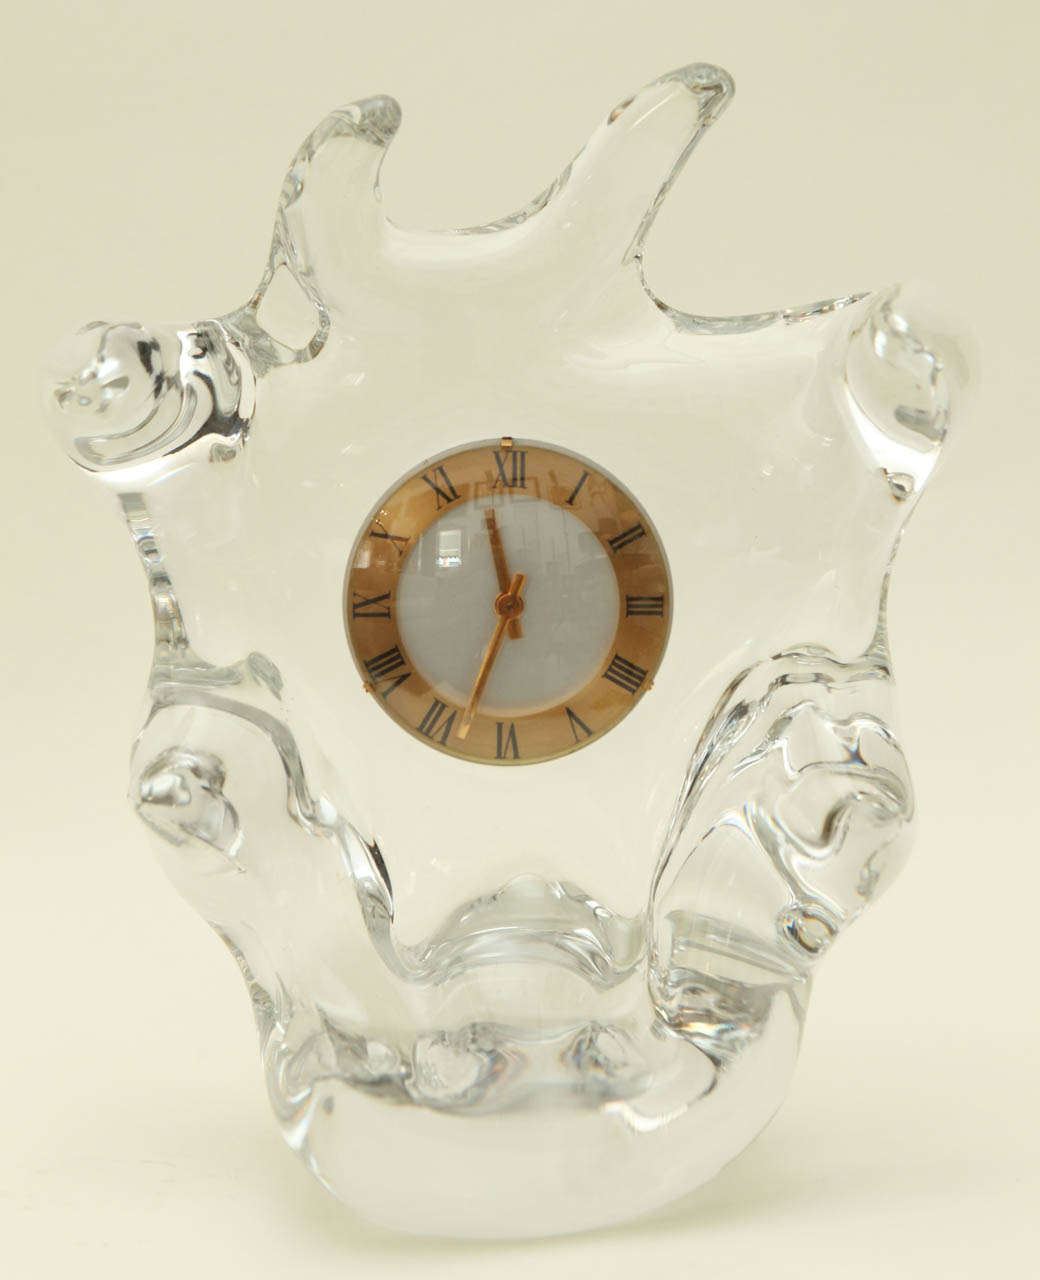 A biomorphic crystal clock by Schneider Glass. Signed on the underside with the Schneider name (see Image 10). The 8-day movement is by CH Mour of France.